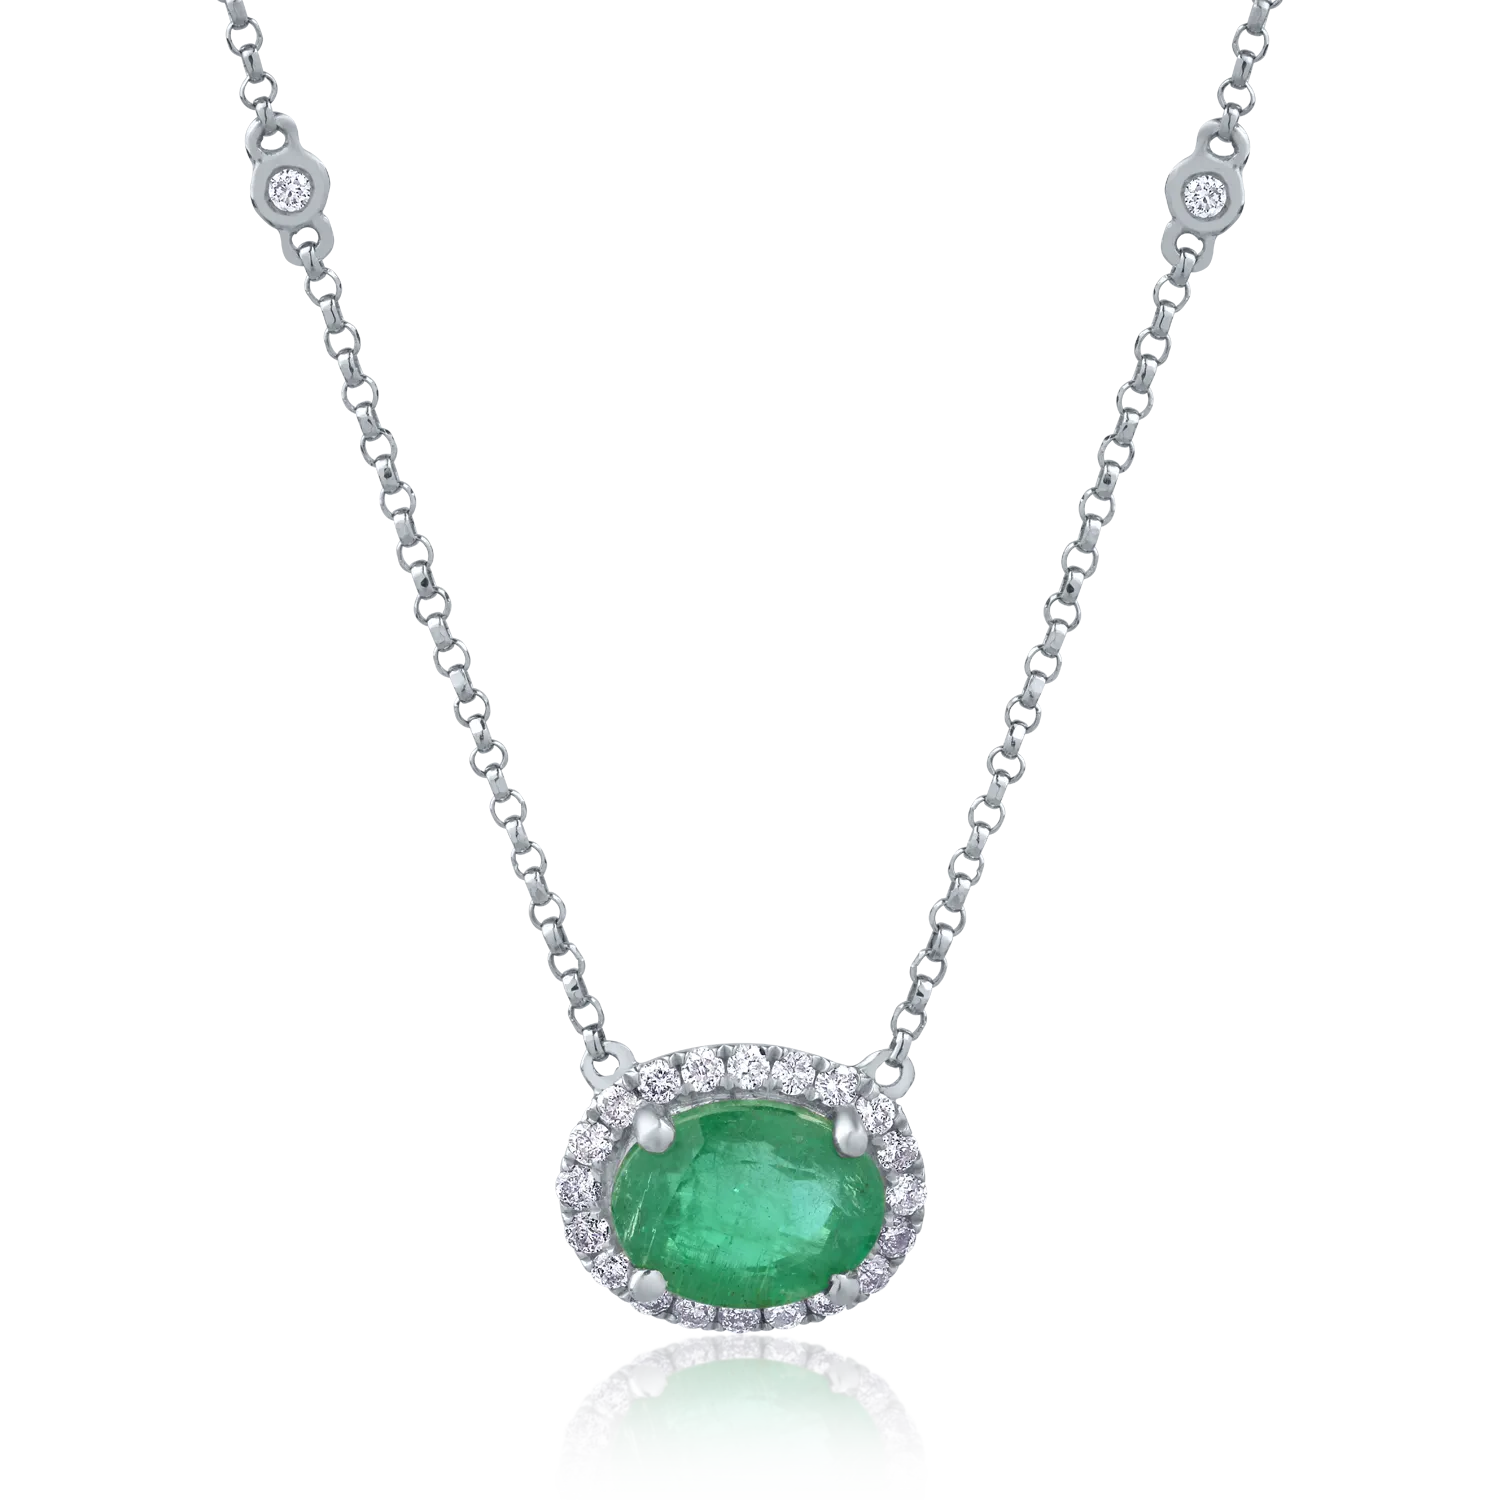 18K white gold necklace with 1.2ct emerald and 0.2ct diamonds